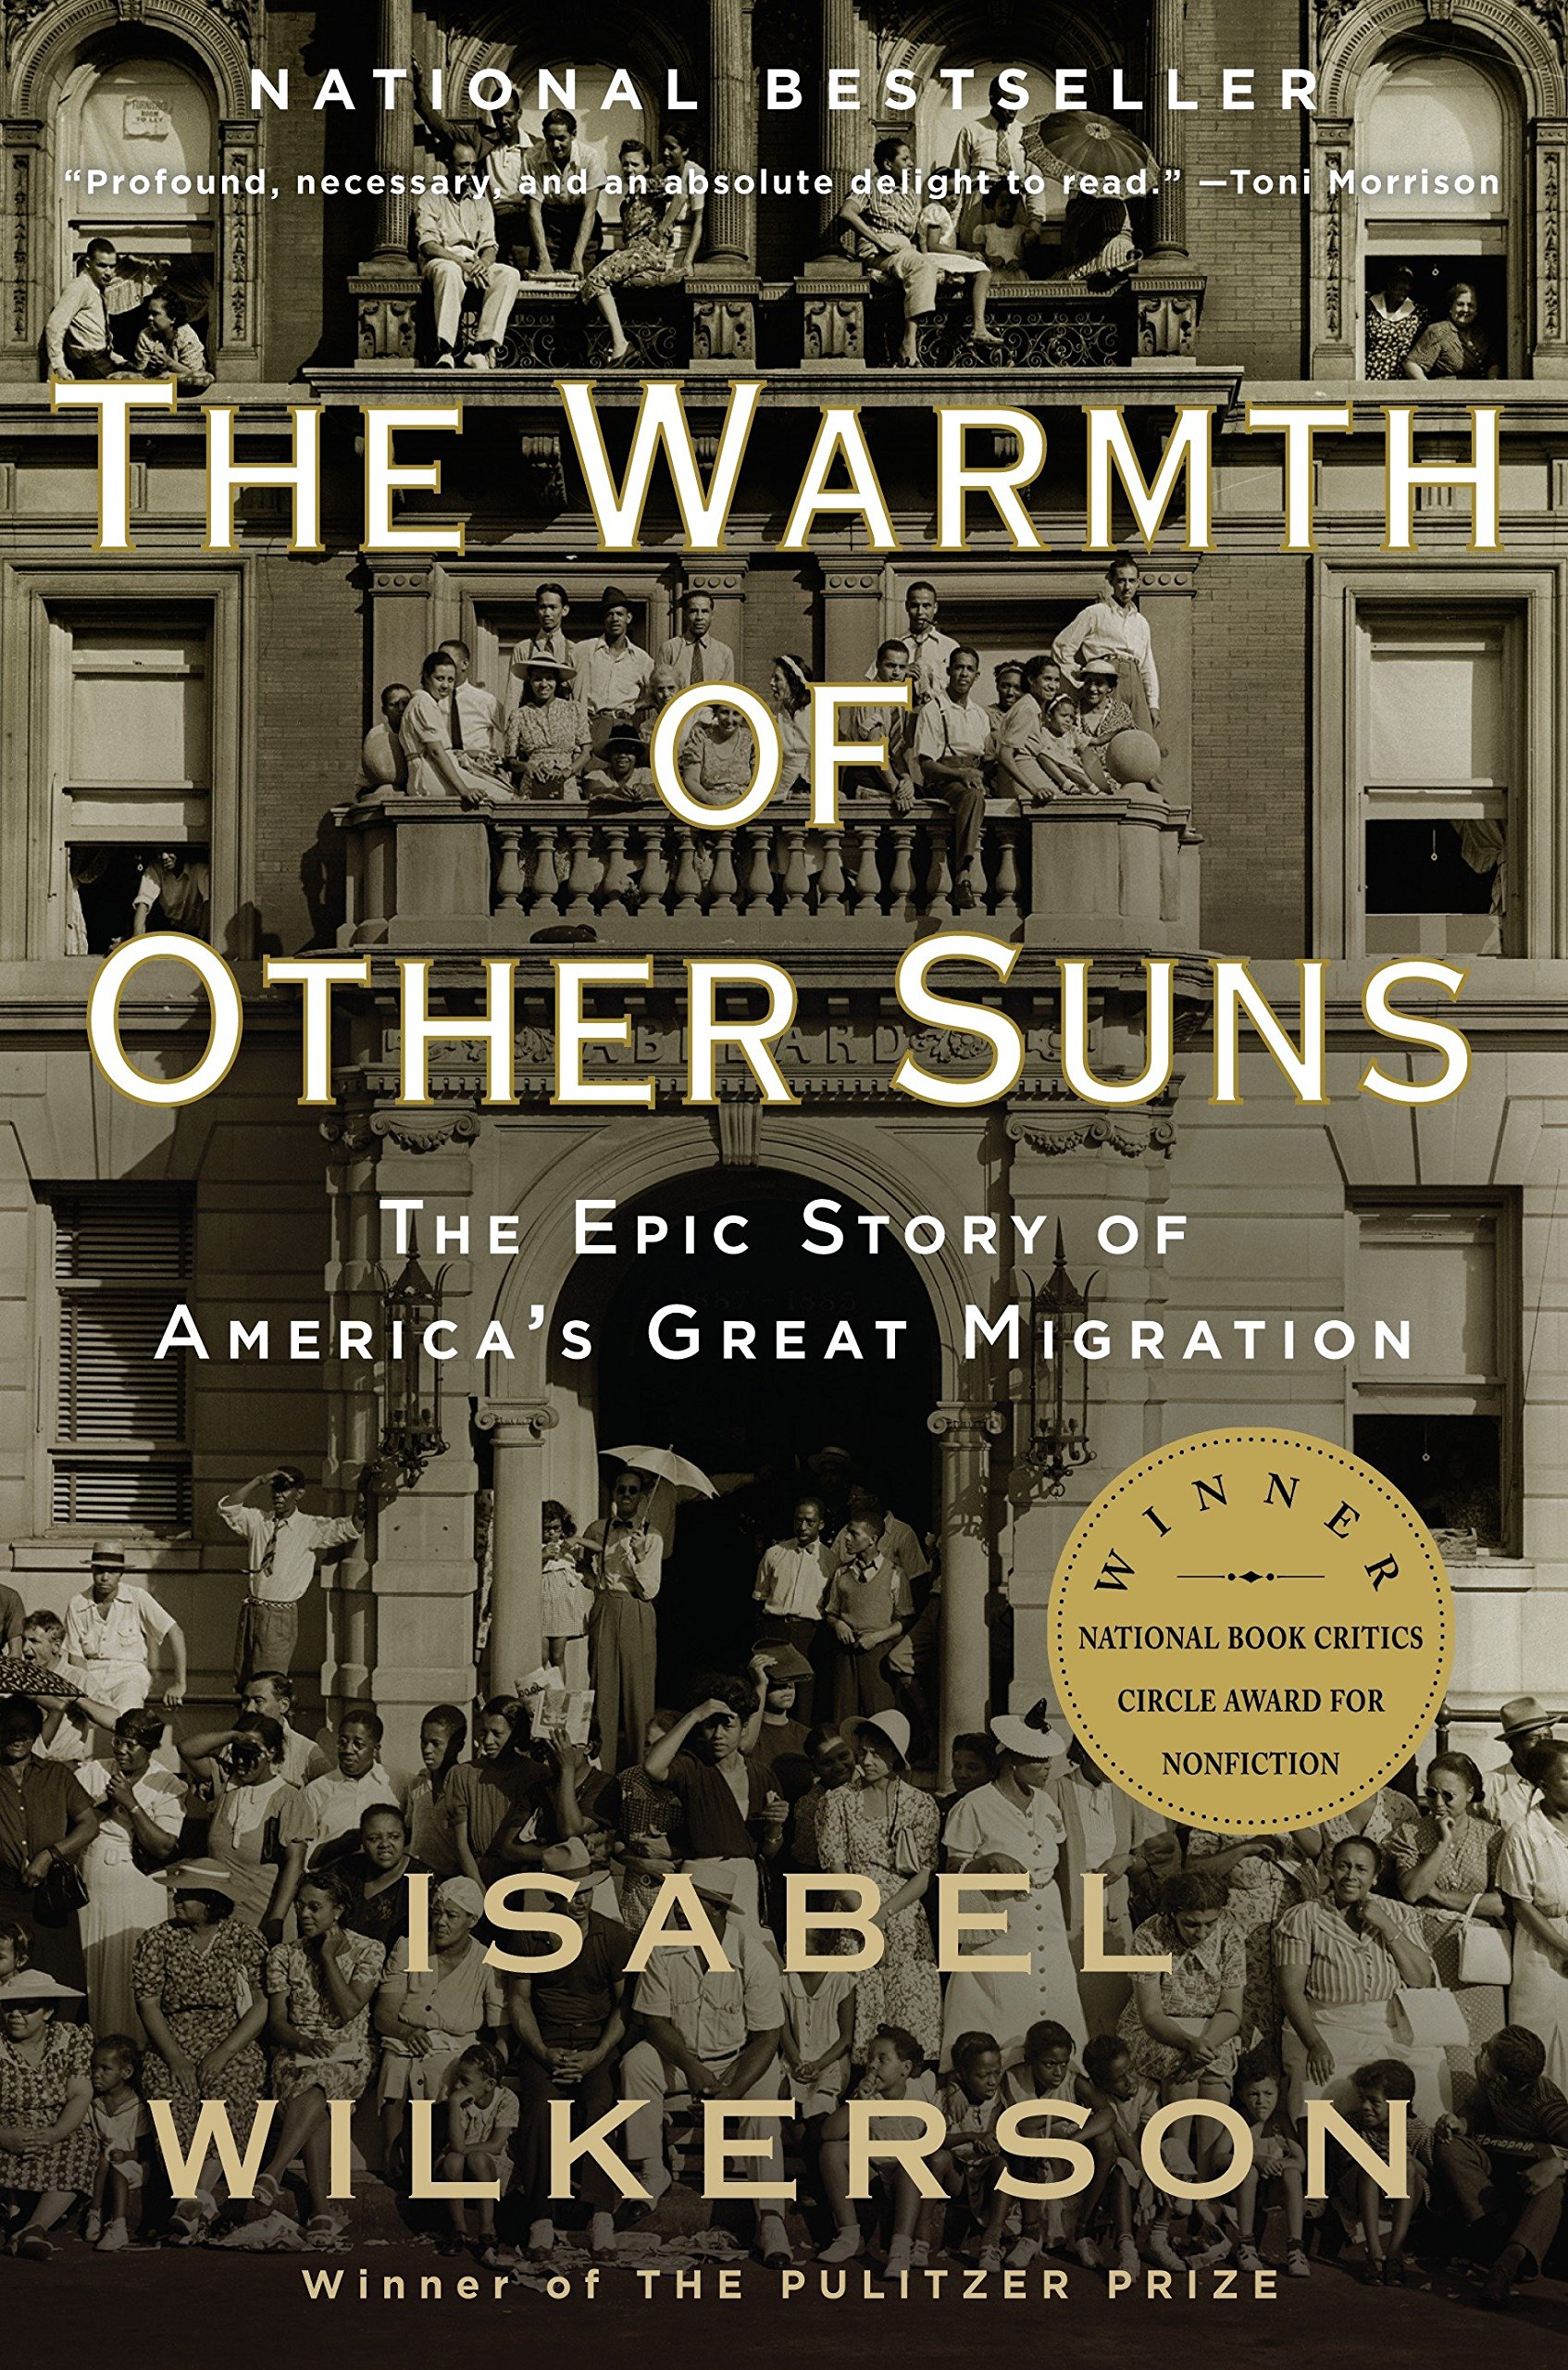 Cover of "The Warmth of Other Suns" by Isabel Wilkerson